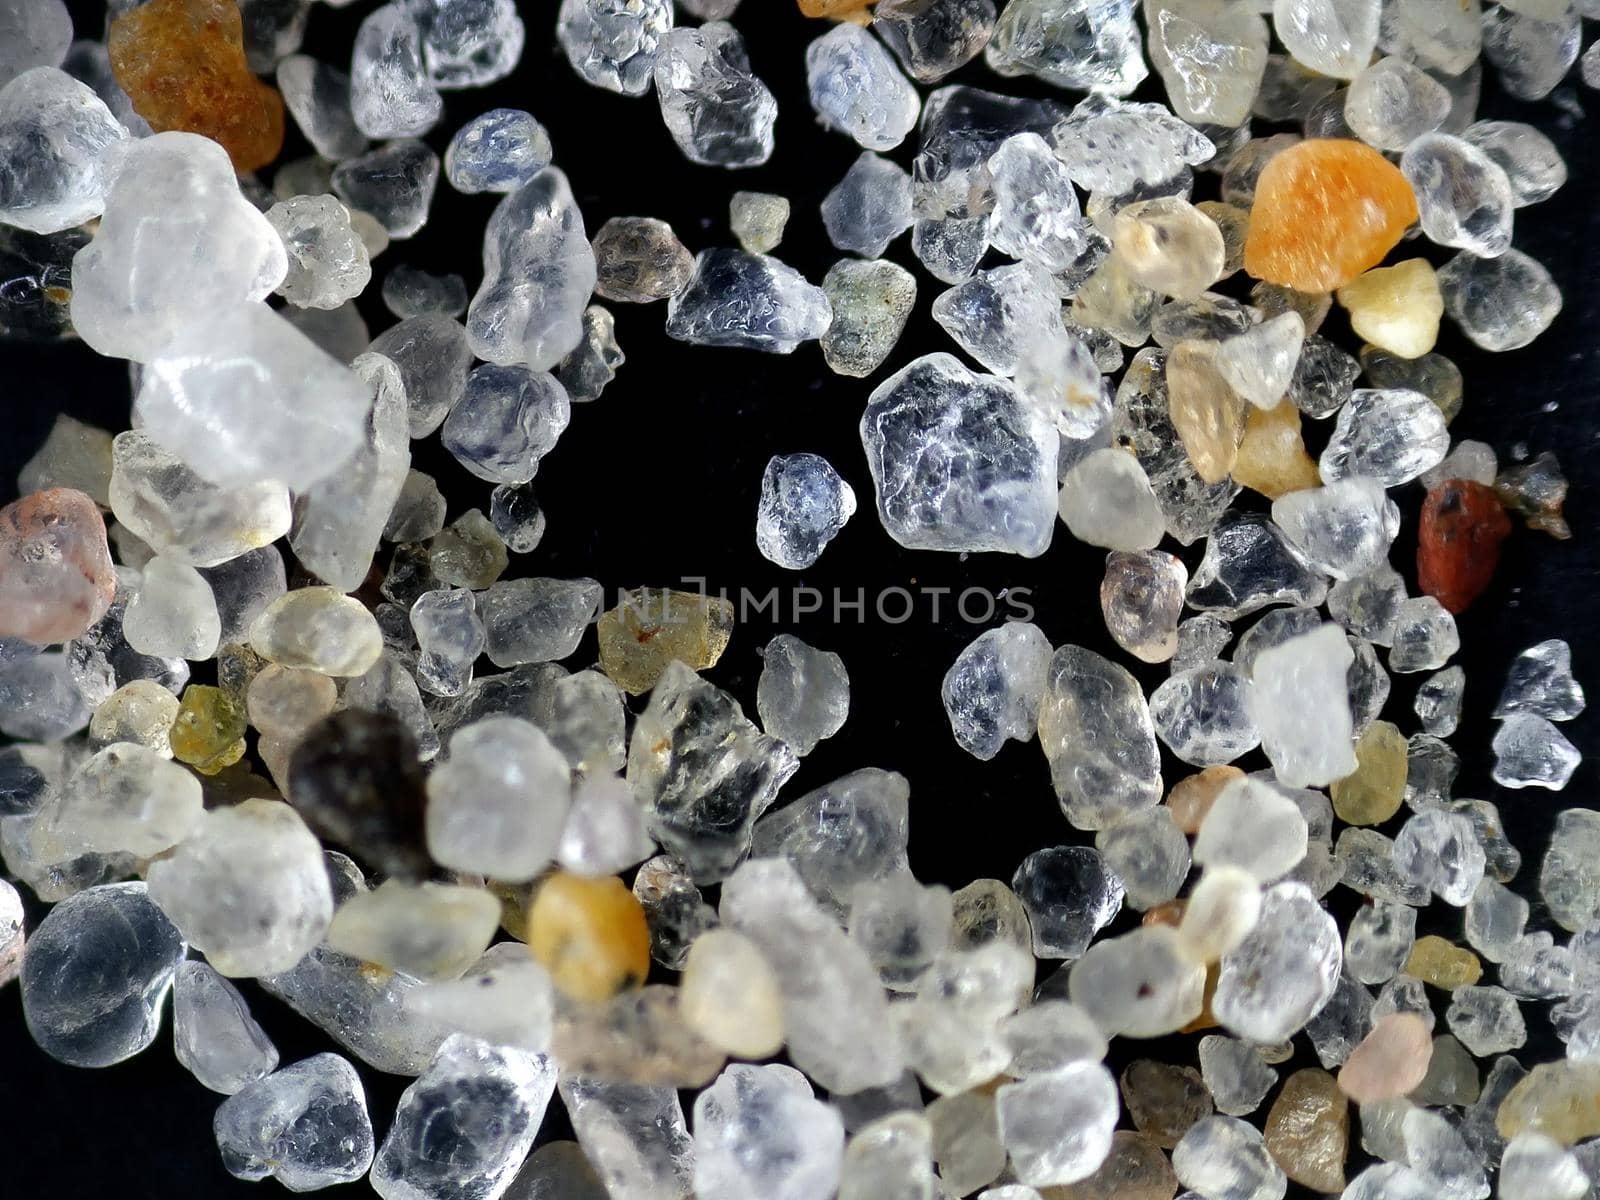 grains of sand under a microscope by Jochen